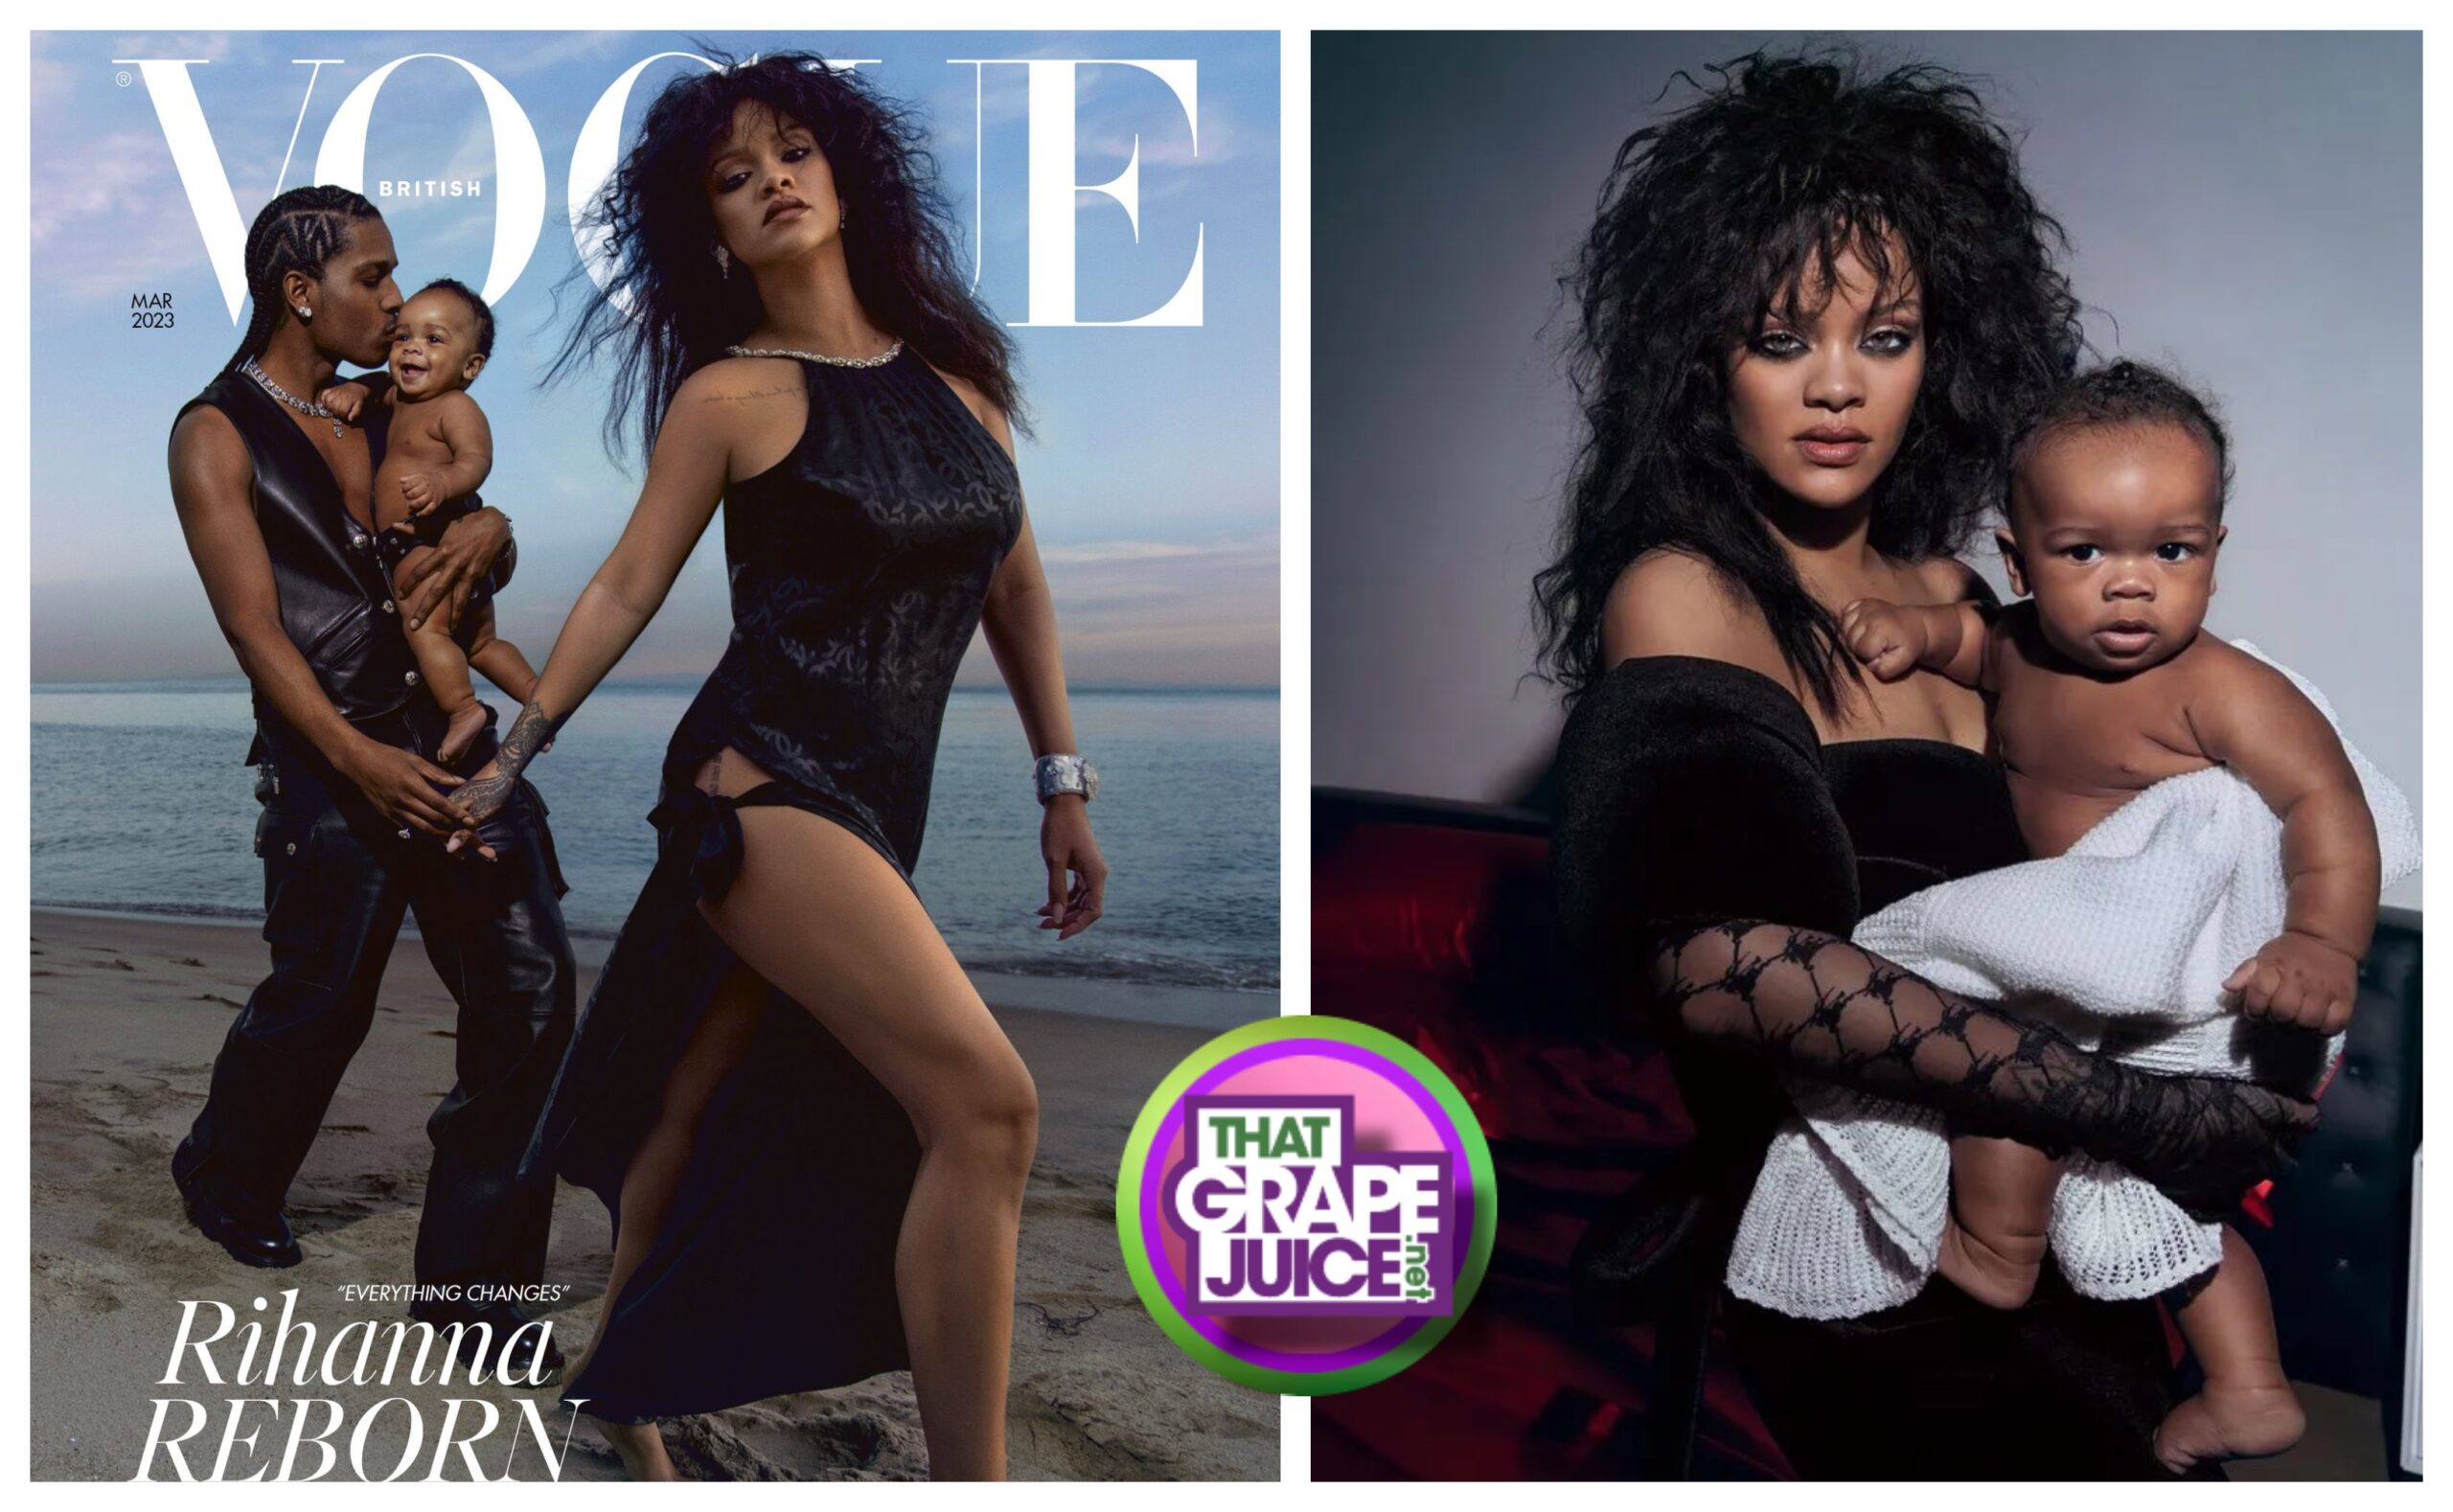 Rihanna Covers British Vogue with Baby Boy, Spills on Wanting New Album Out “THIS YEAR,” Last Minute Decision to Headline the Super Bowl, Motherhood, & More